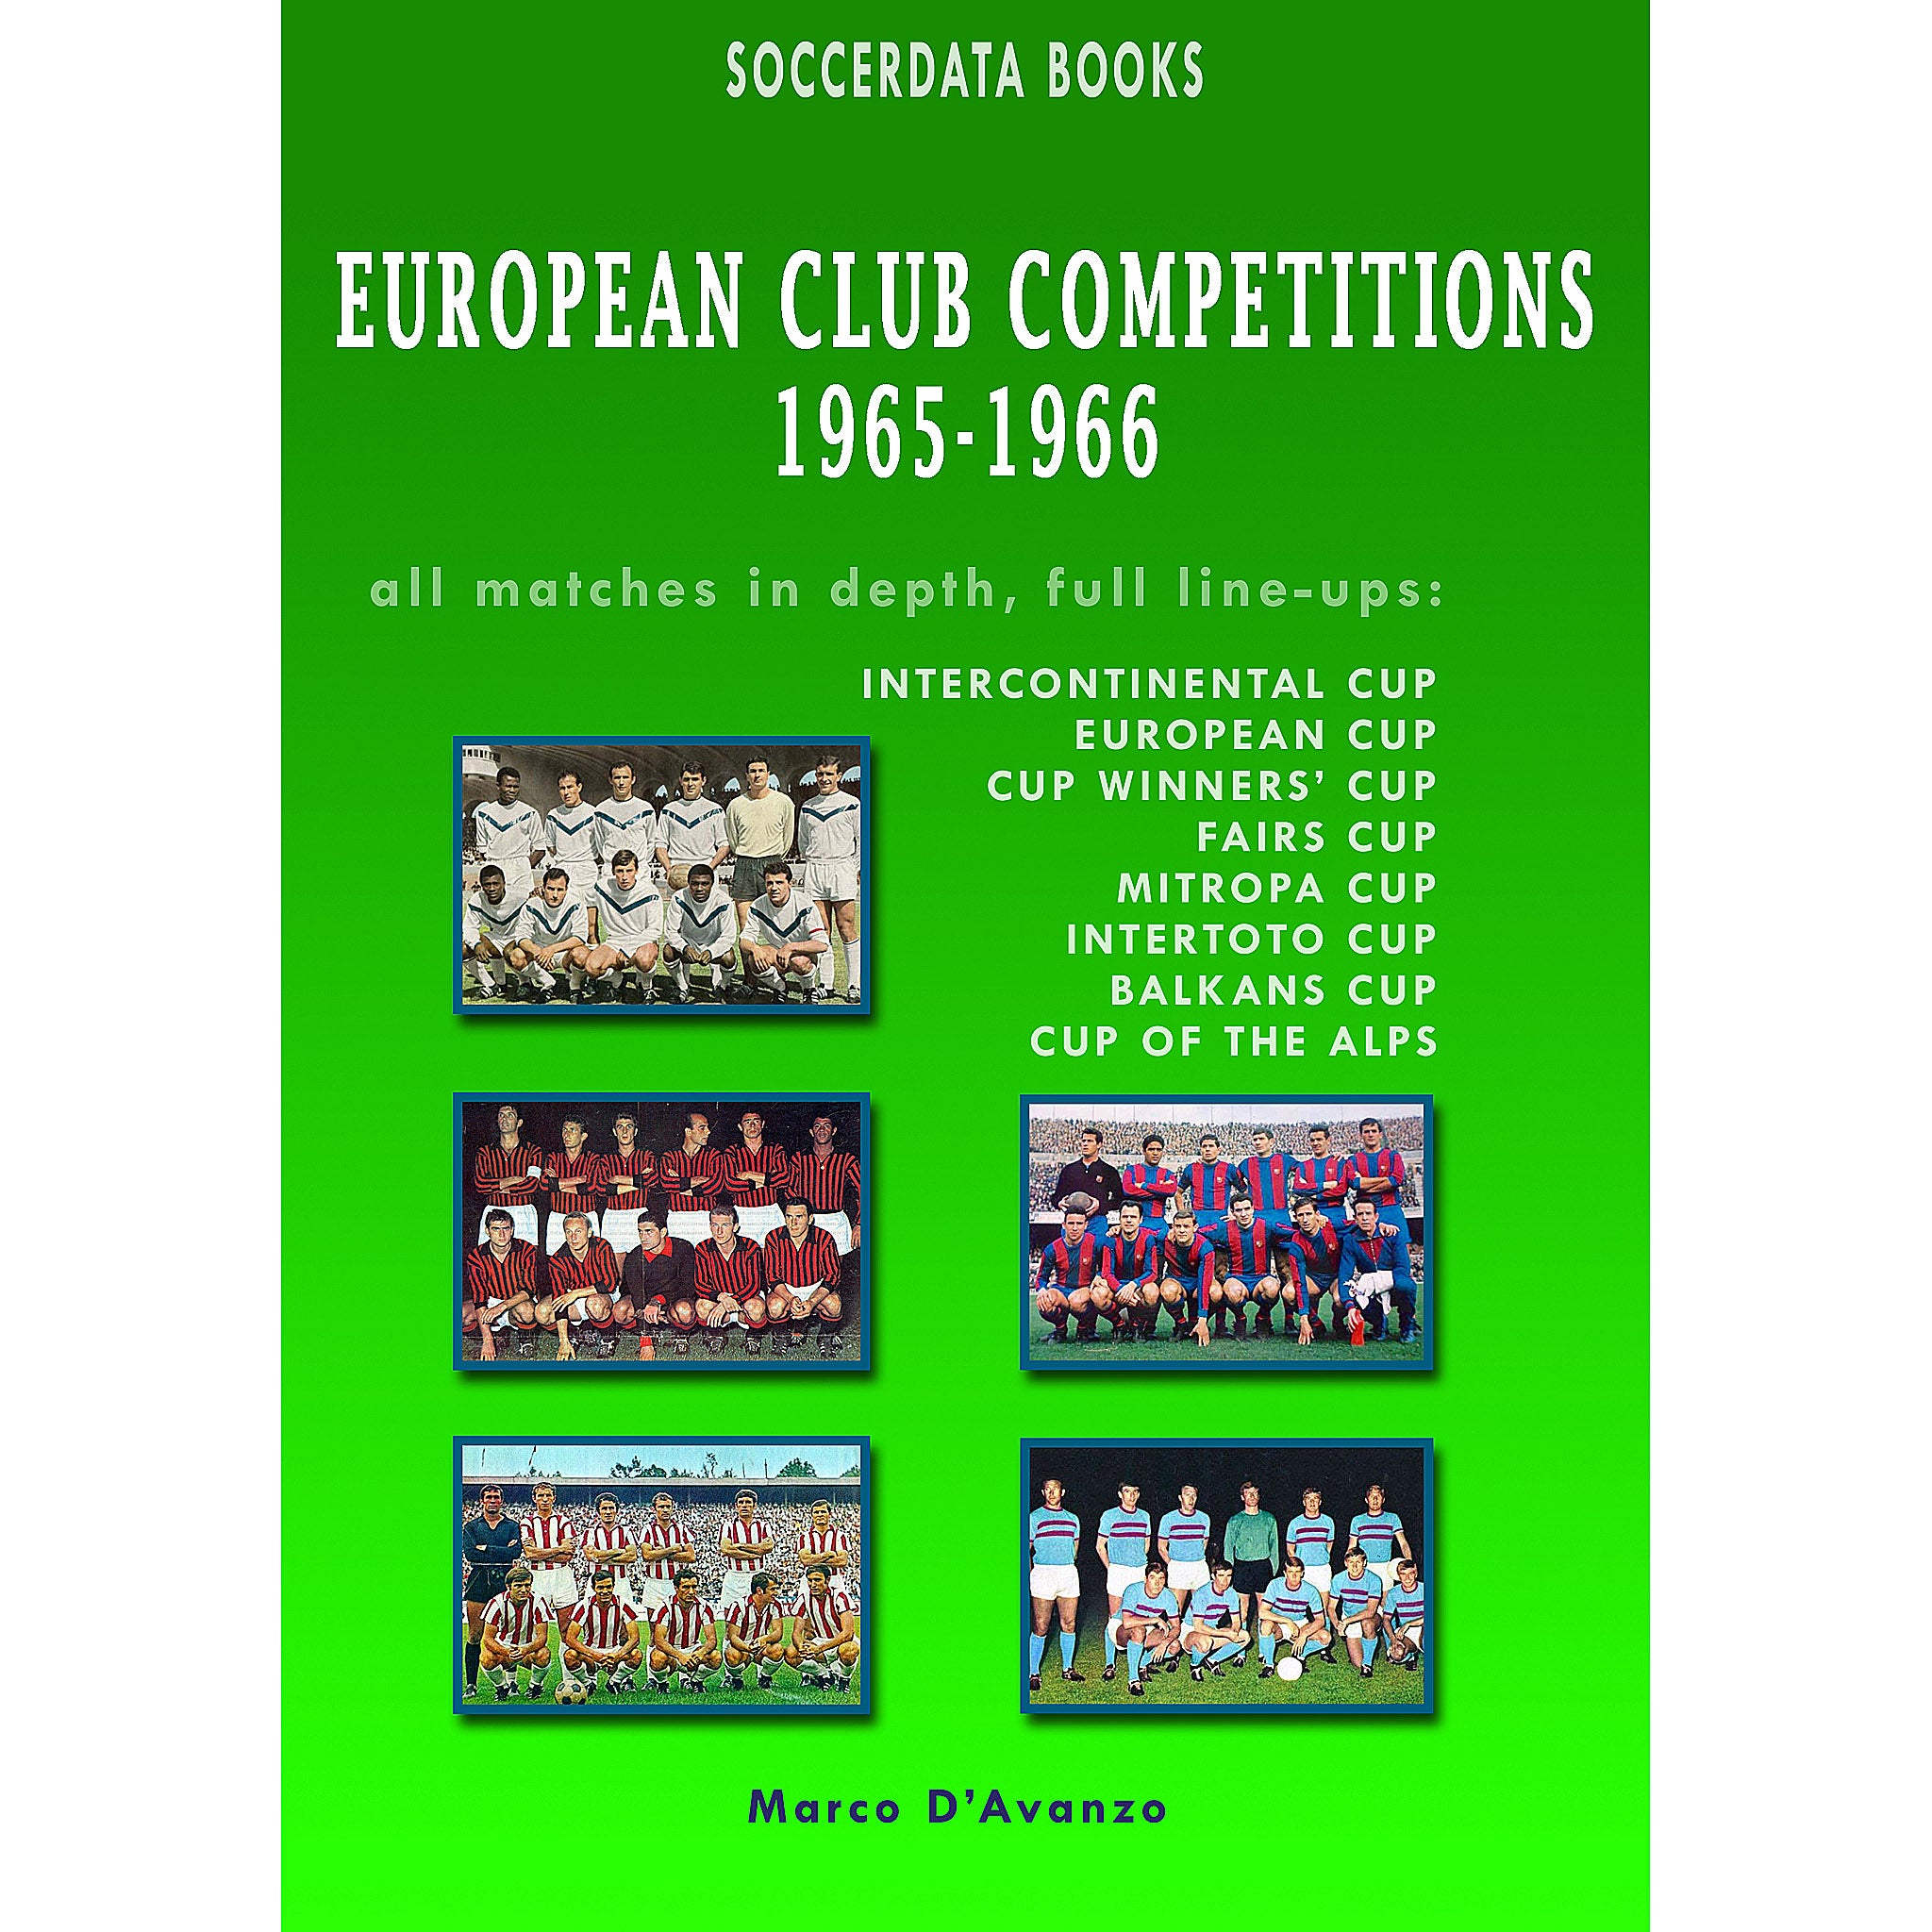 European Club Competitions 1965-1966